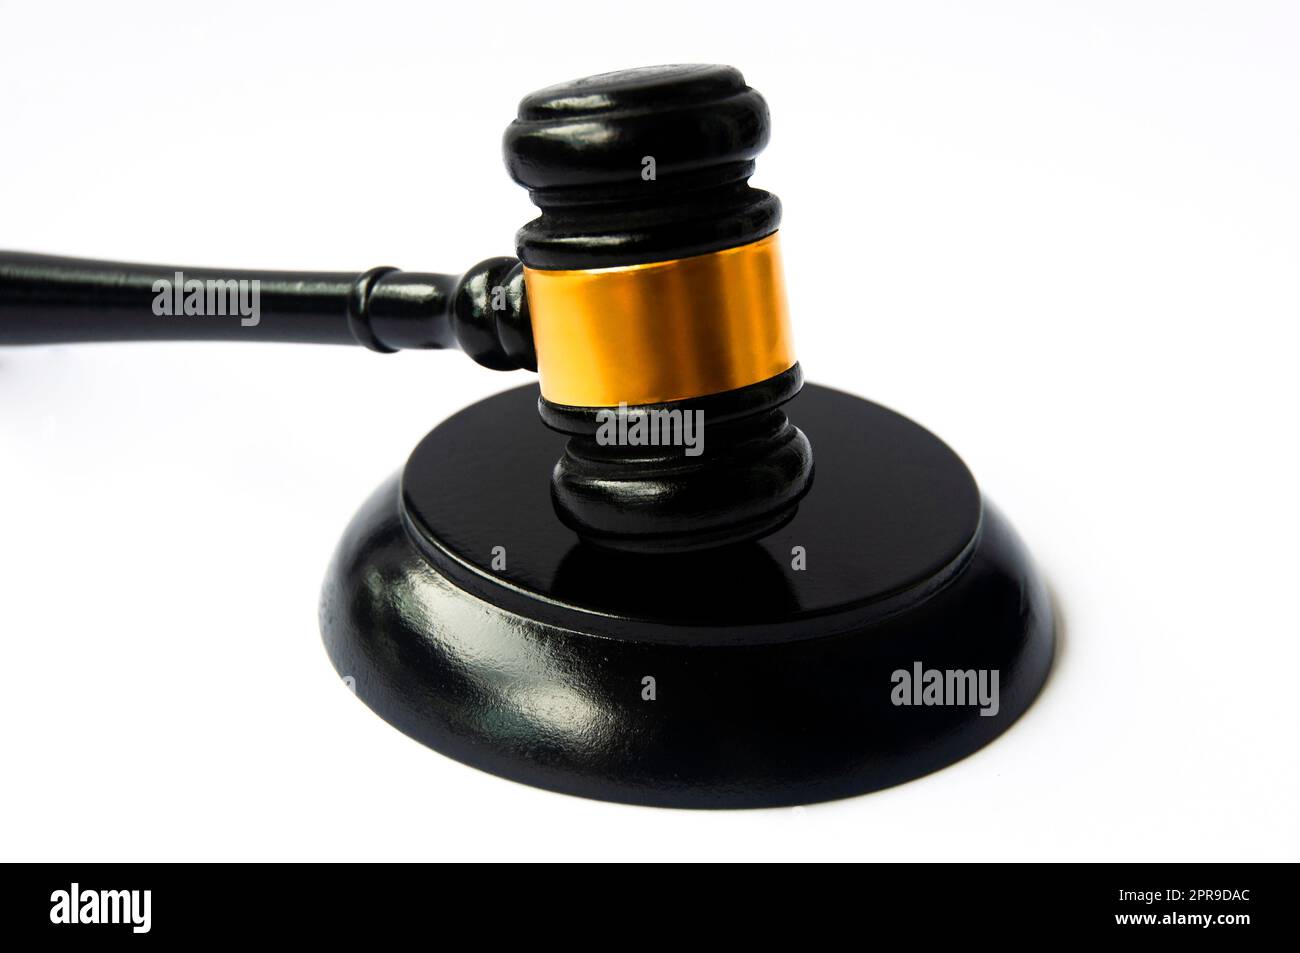 Lawyer gavel on white cover background. Law concept Stock Photo